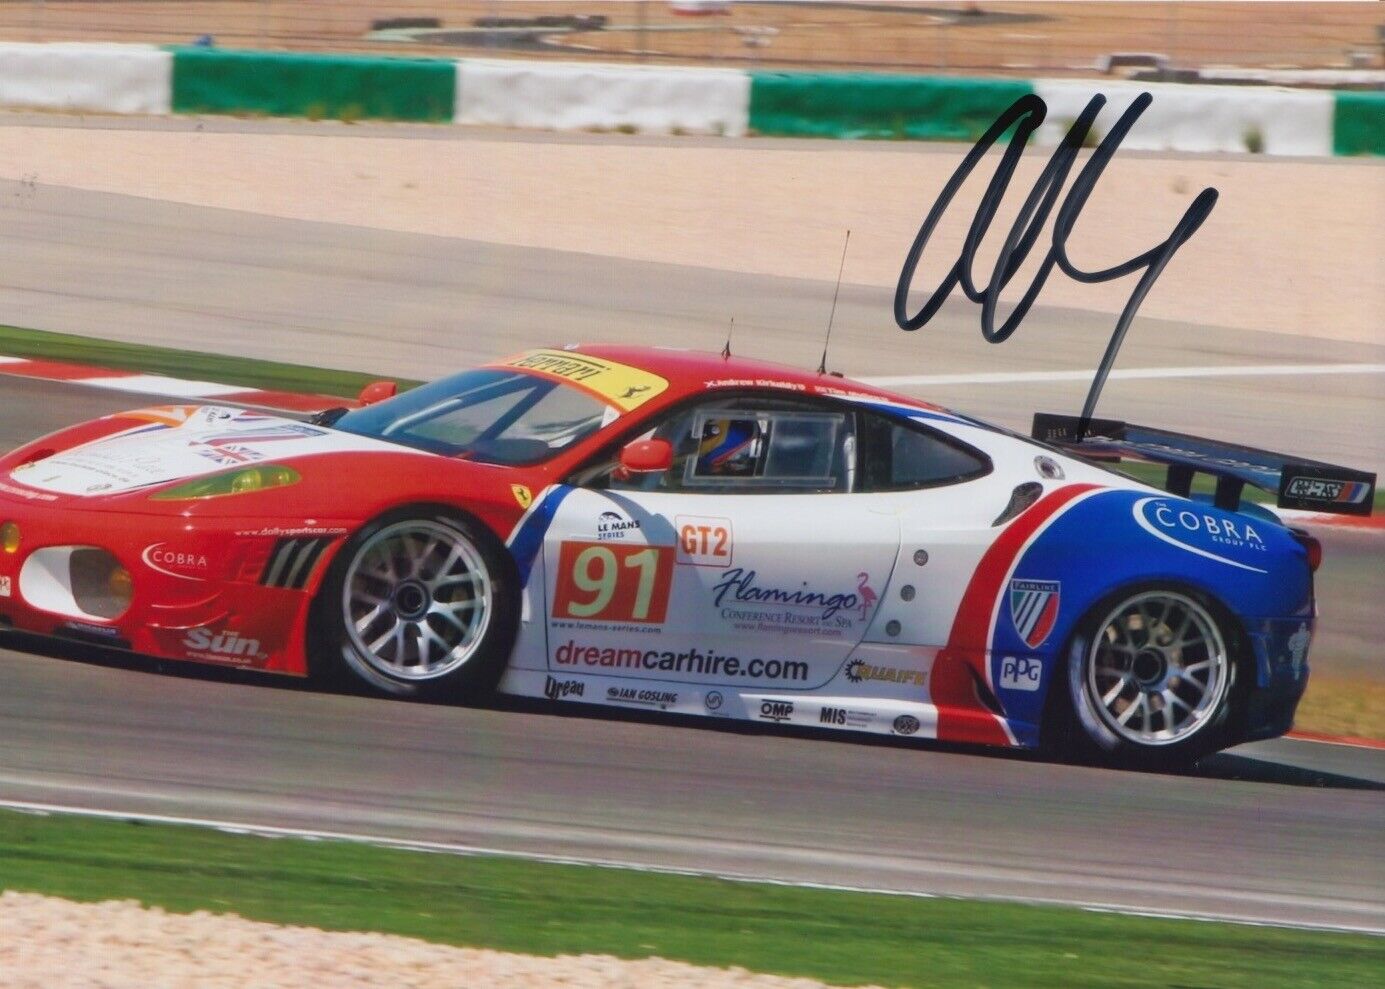 Andrew Kirkaldy Hand Signed 7x5 Photo Poster painting - Le Mans / Sports Car Autograph 6.